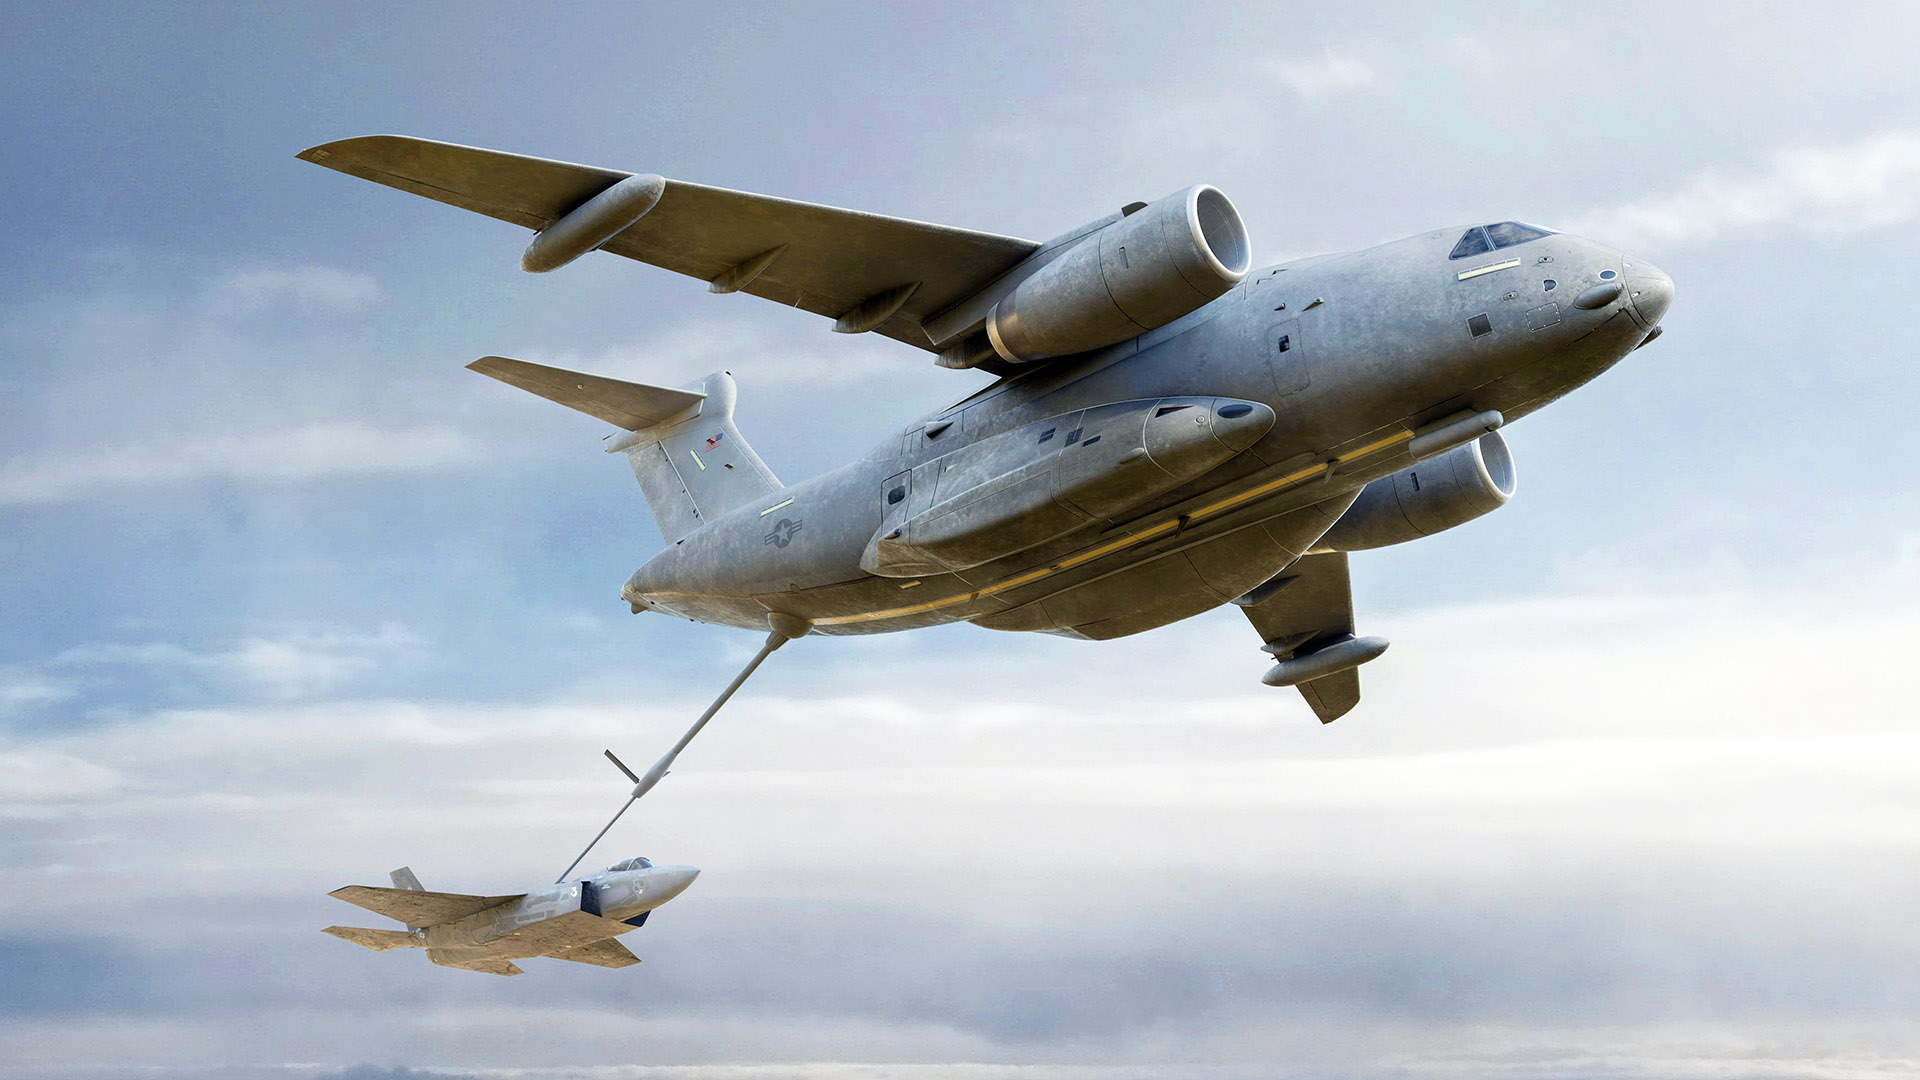 KC-390 With A Boom Could Be The Agile Tanker The Air Force Needs - スポーツ